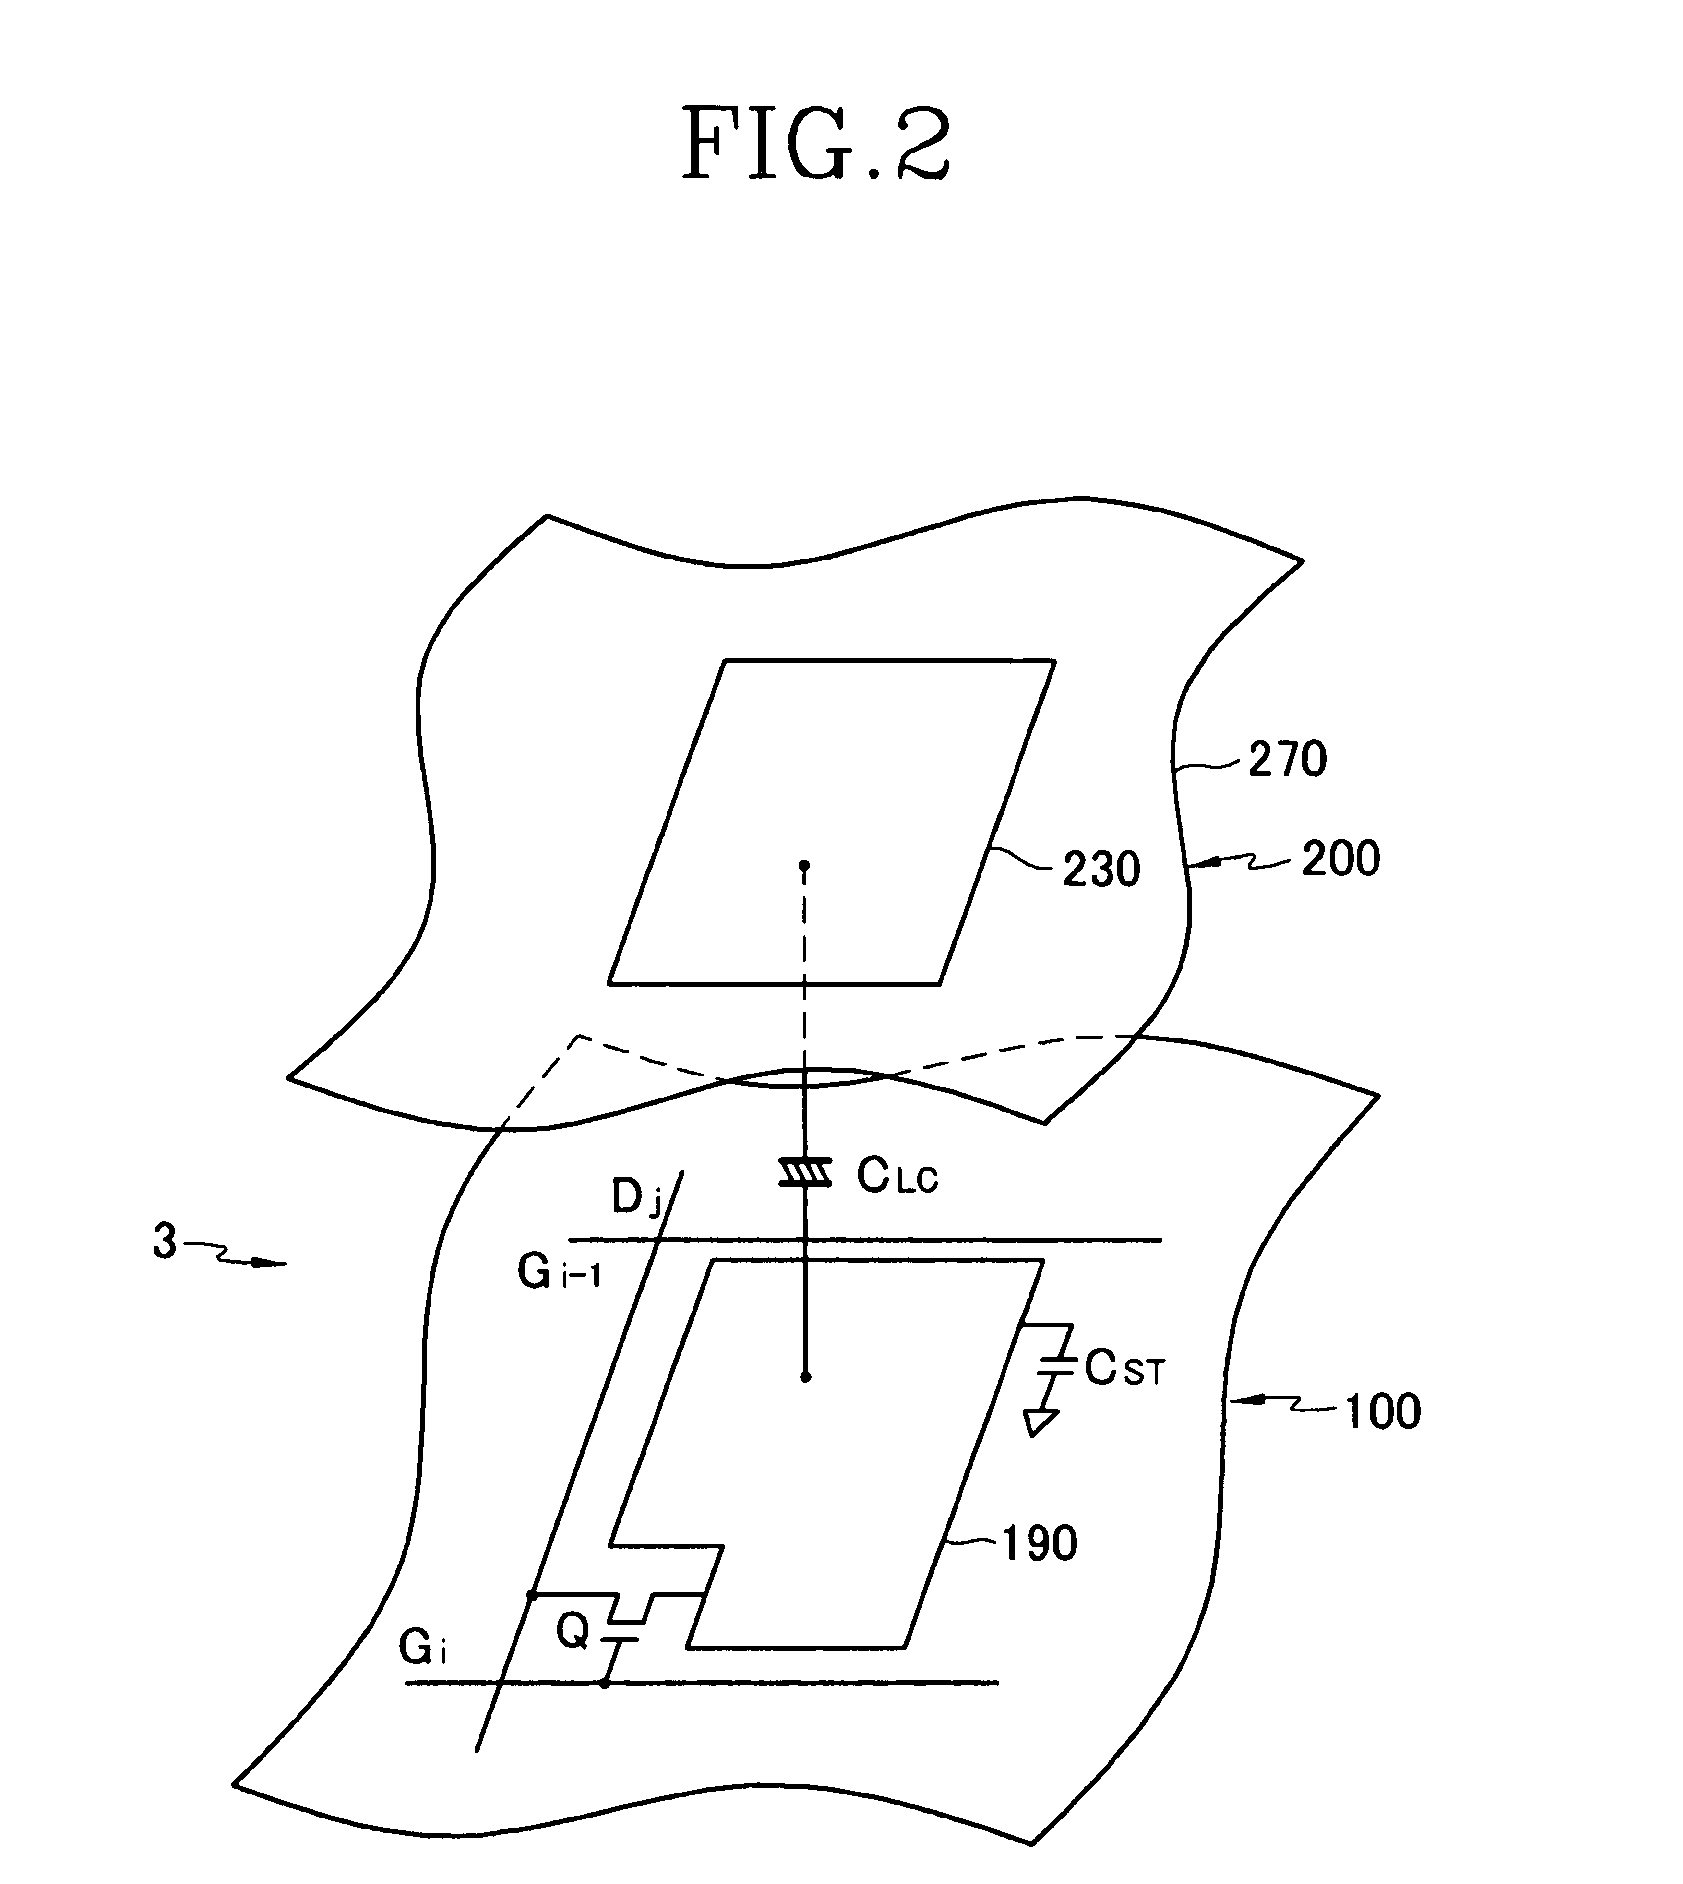 Driver of display device